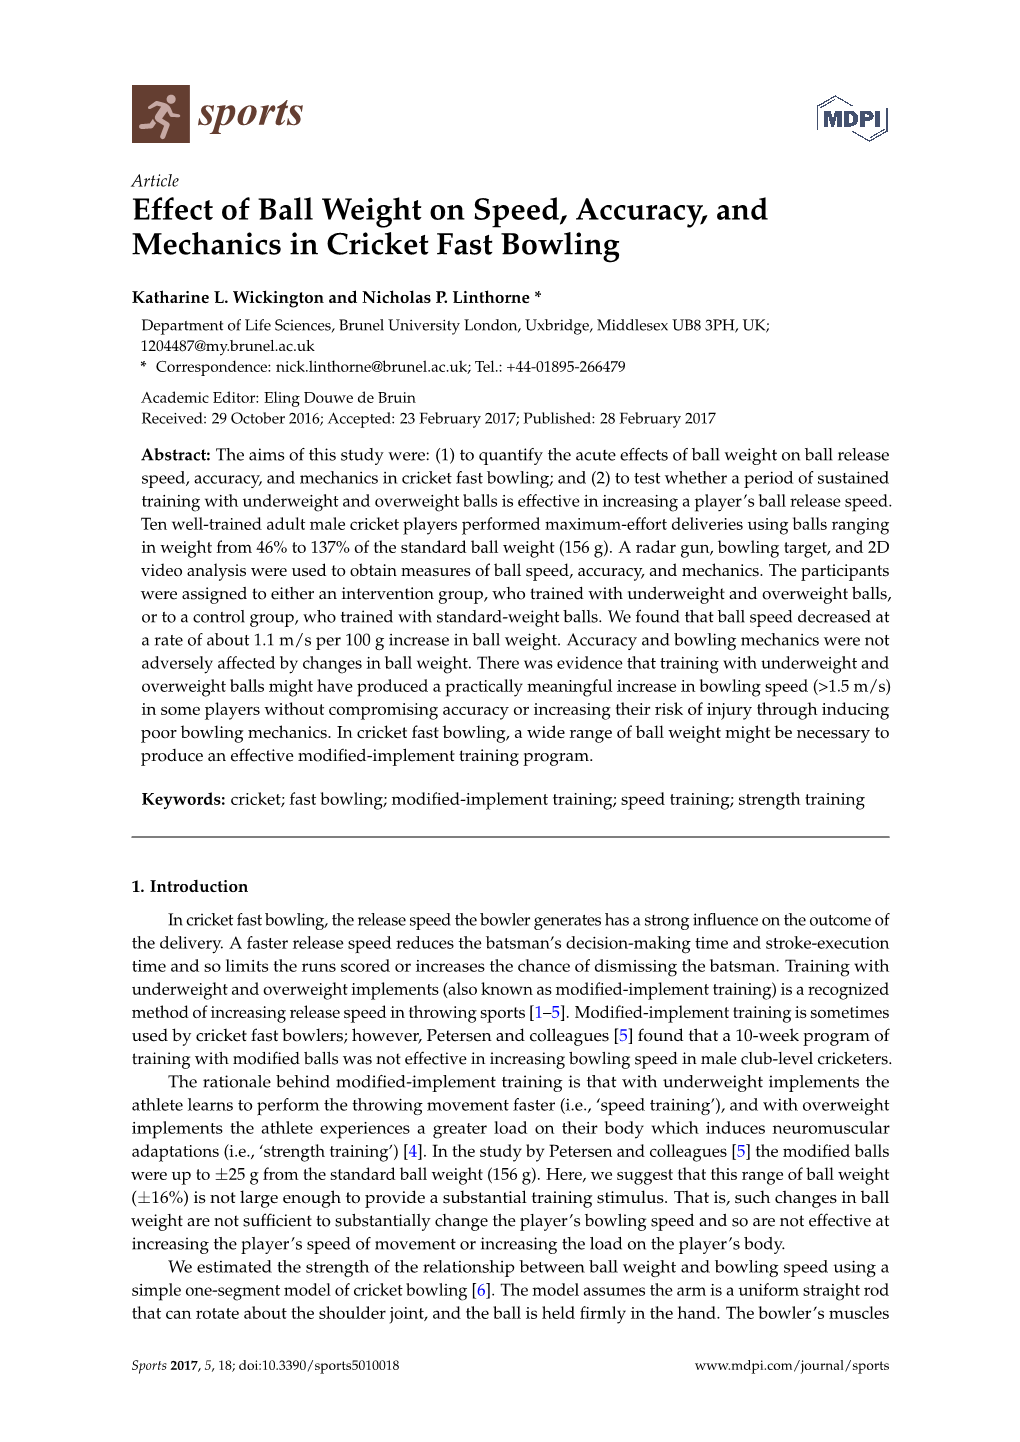 Effect of Ball Weight on Speed, Accuracy, and Mechanics in Cricket Fast Bowling